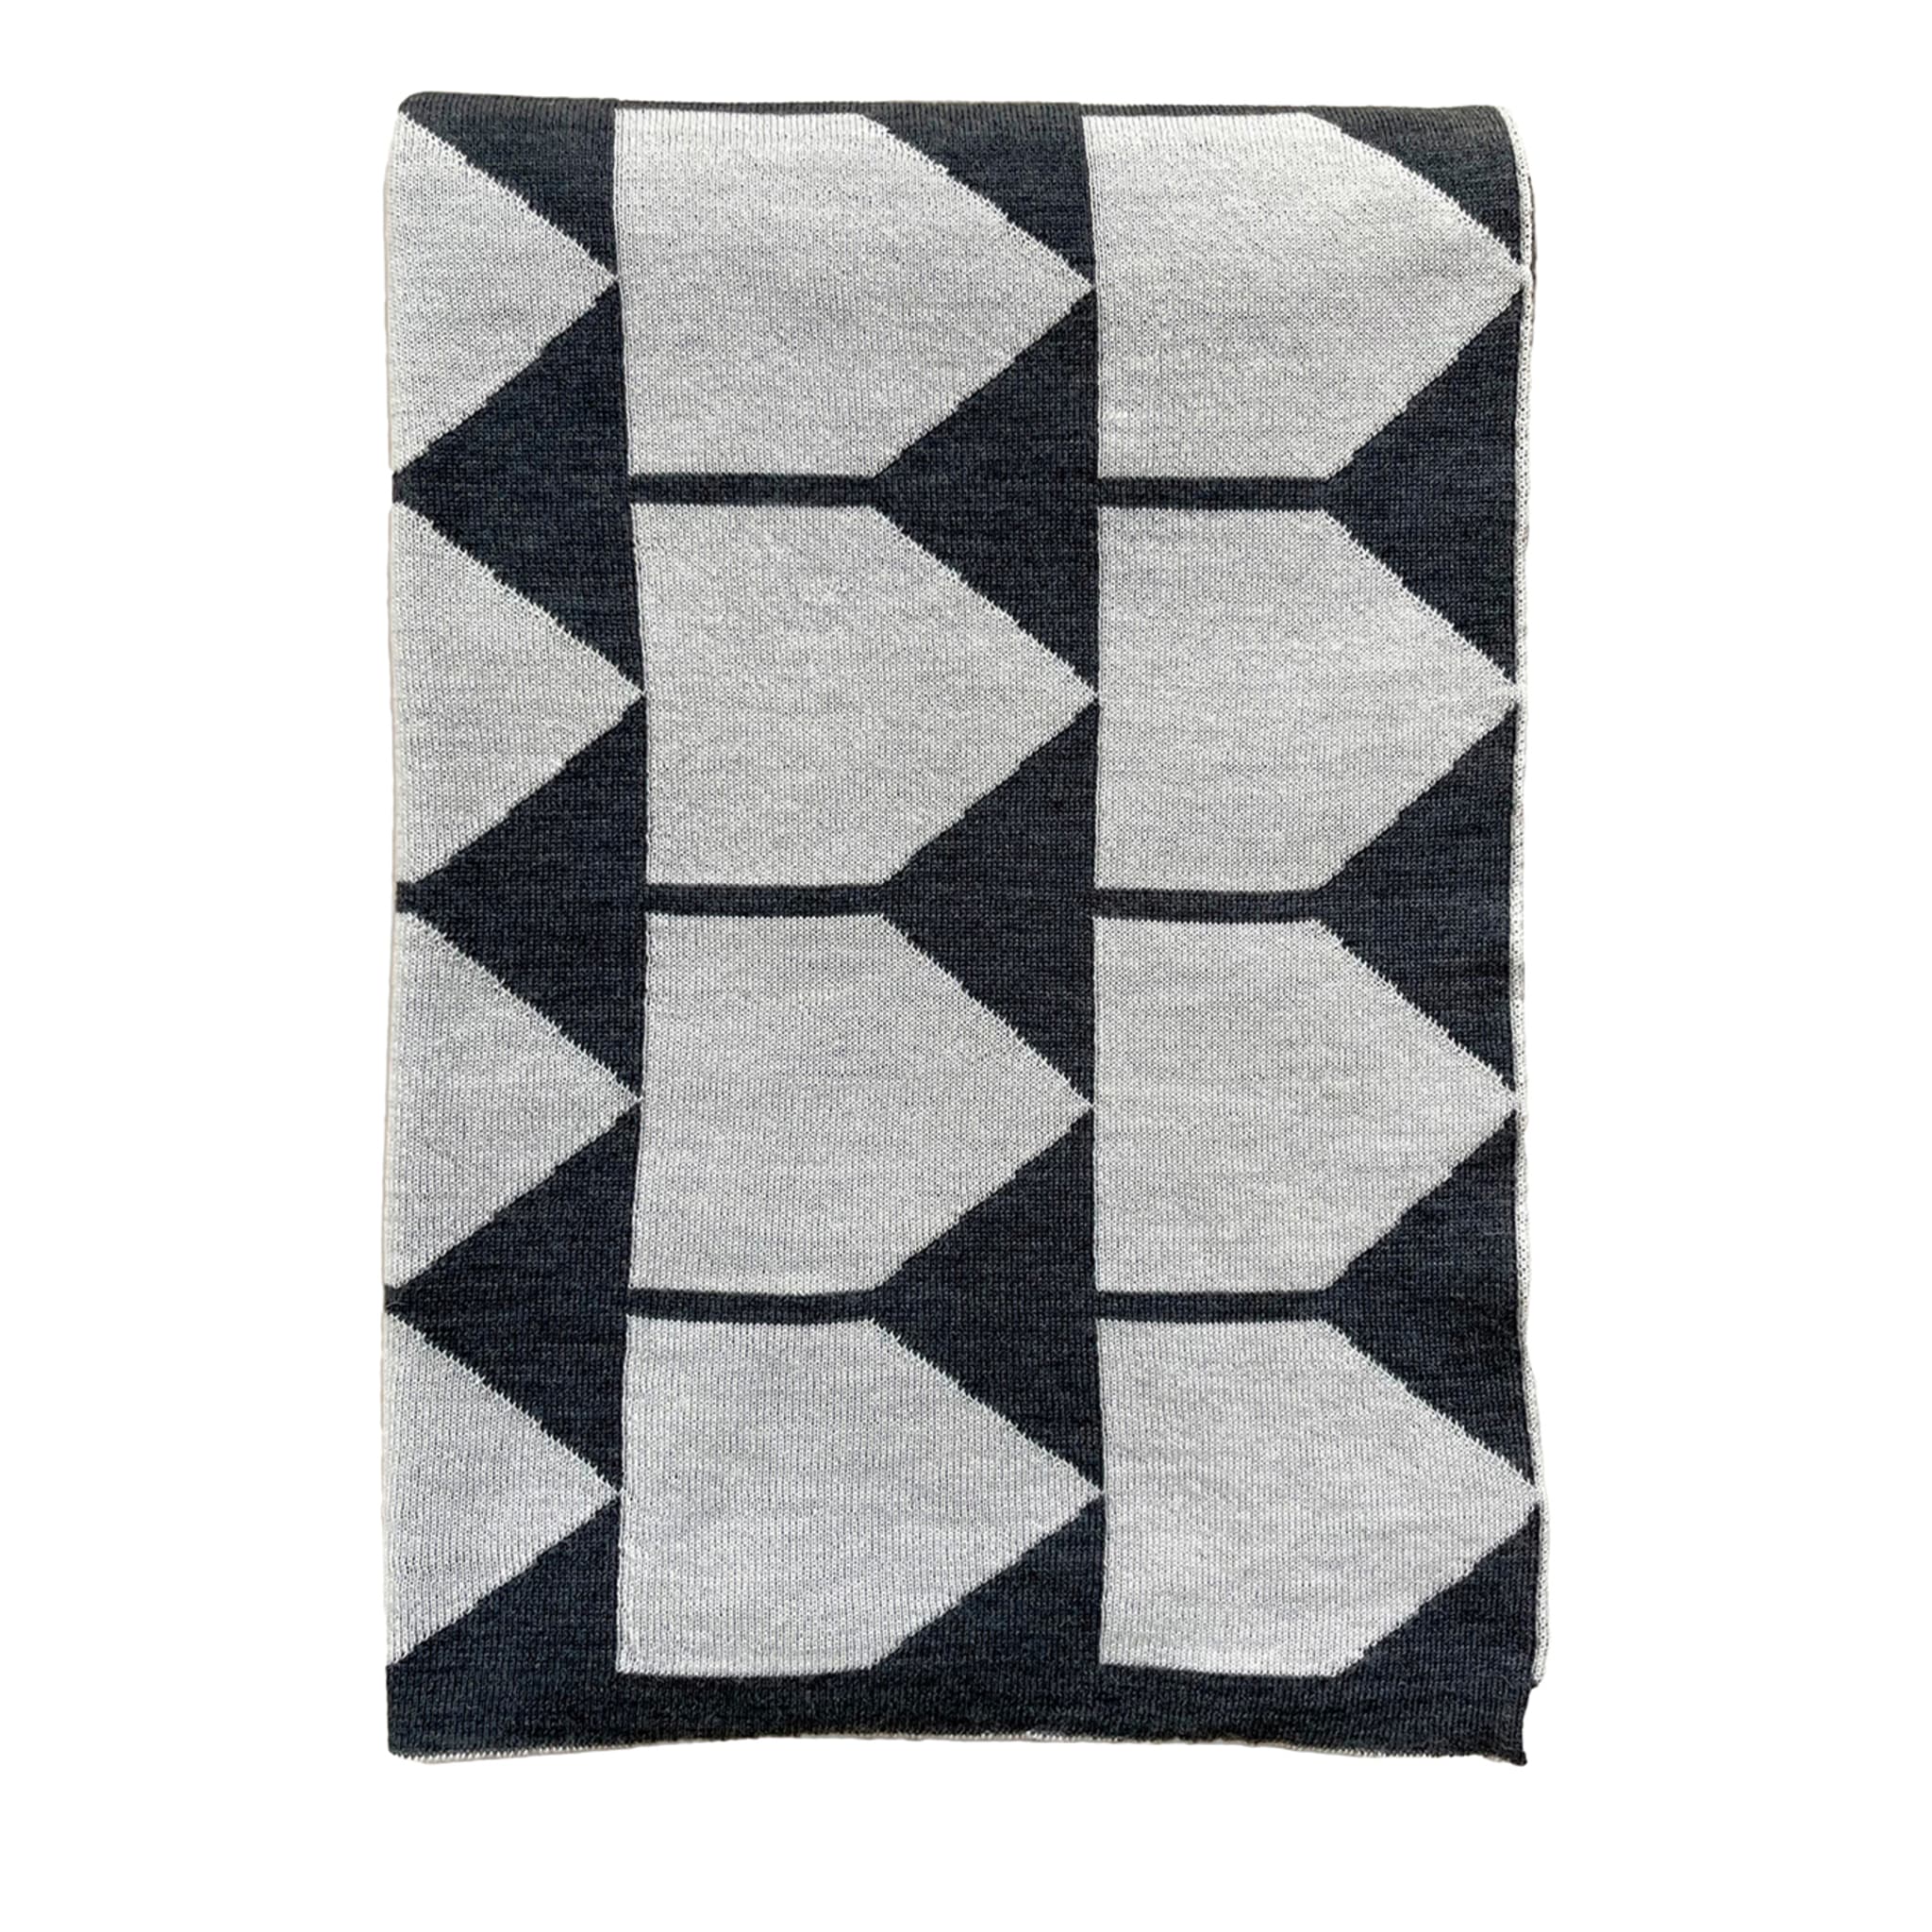 Archetipo Black/White Blanket by Makeyourhome + Walter Terruso - Main view